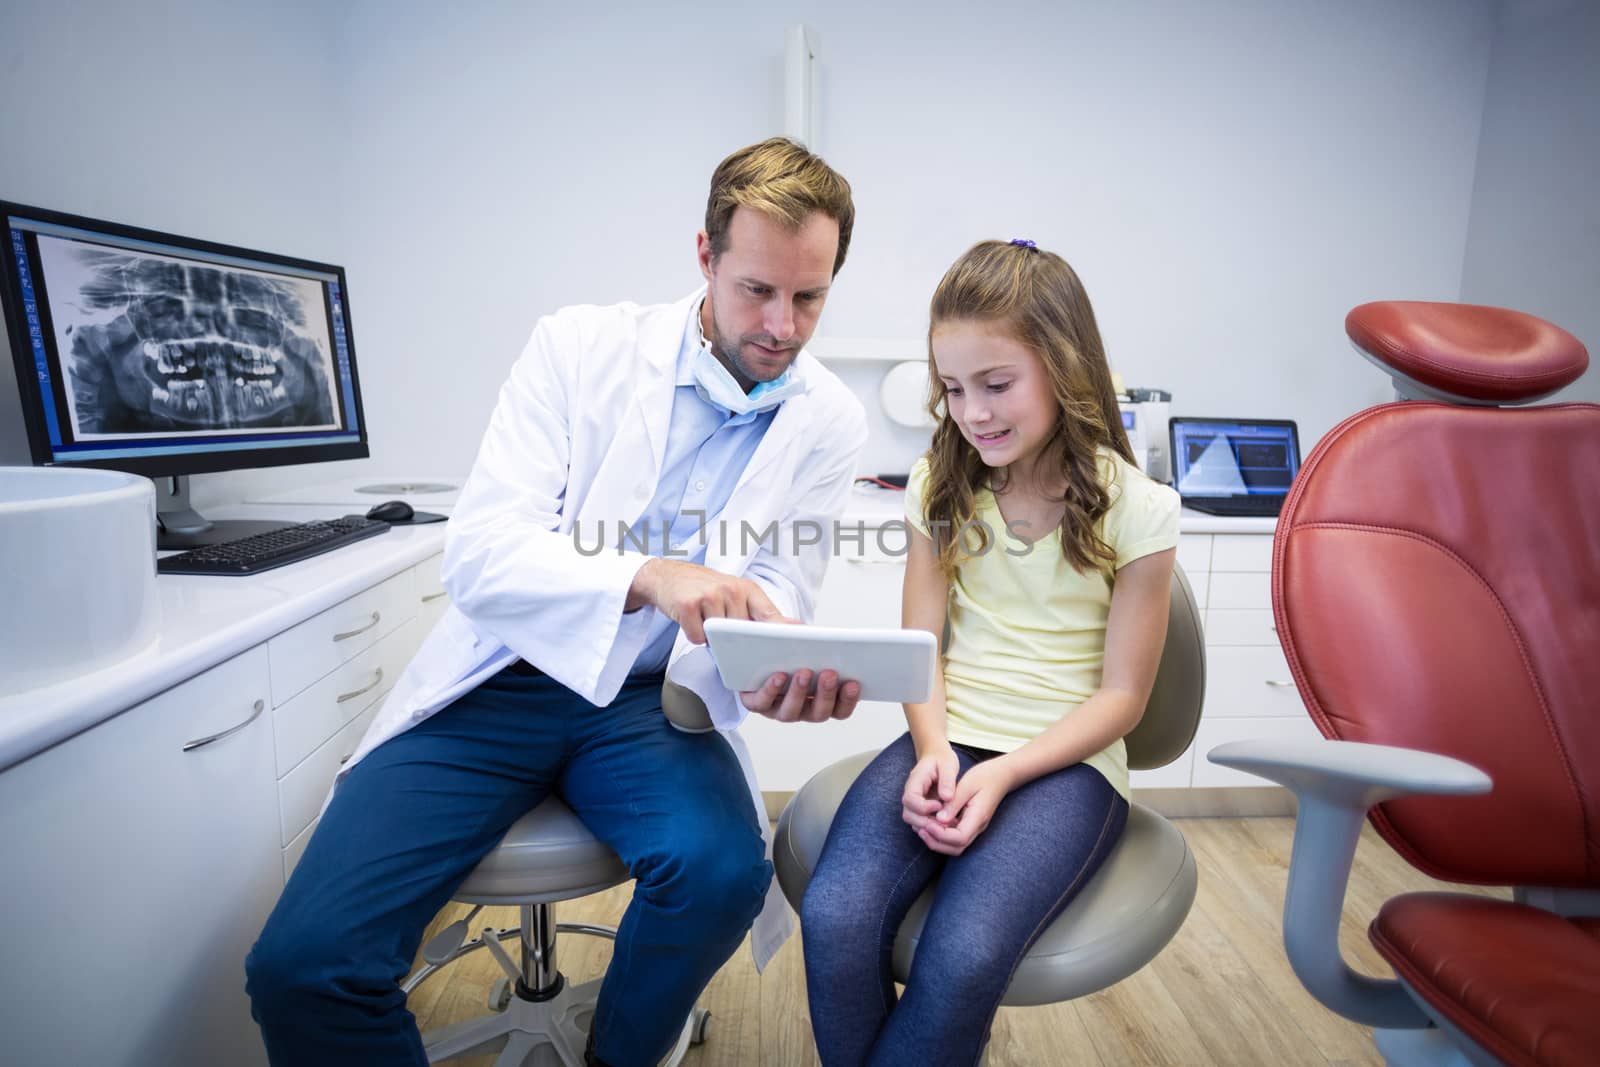 Dentist showing digital tablet to young patient by Wavebreakmedia